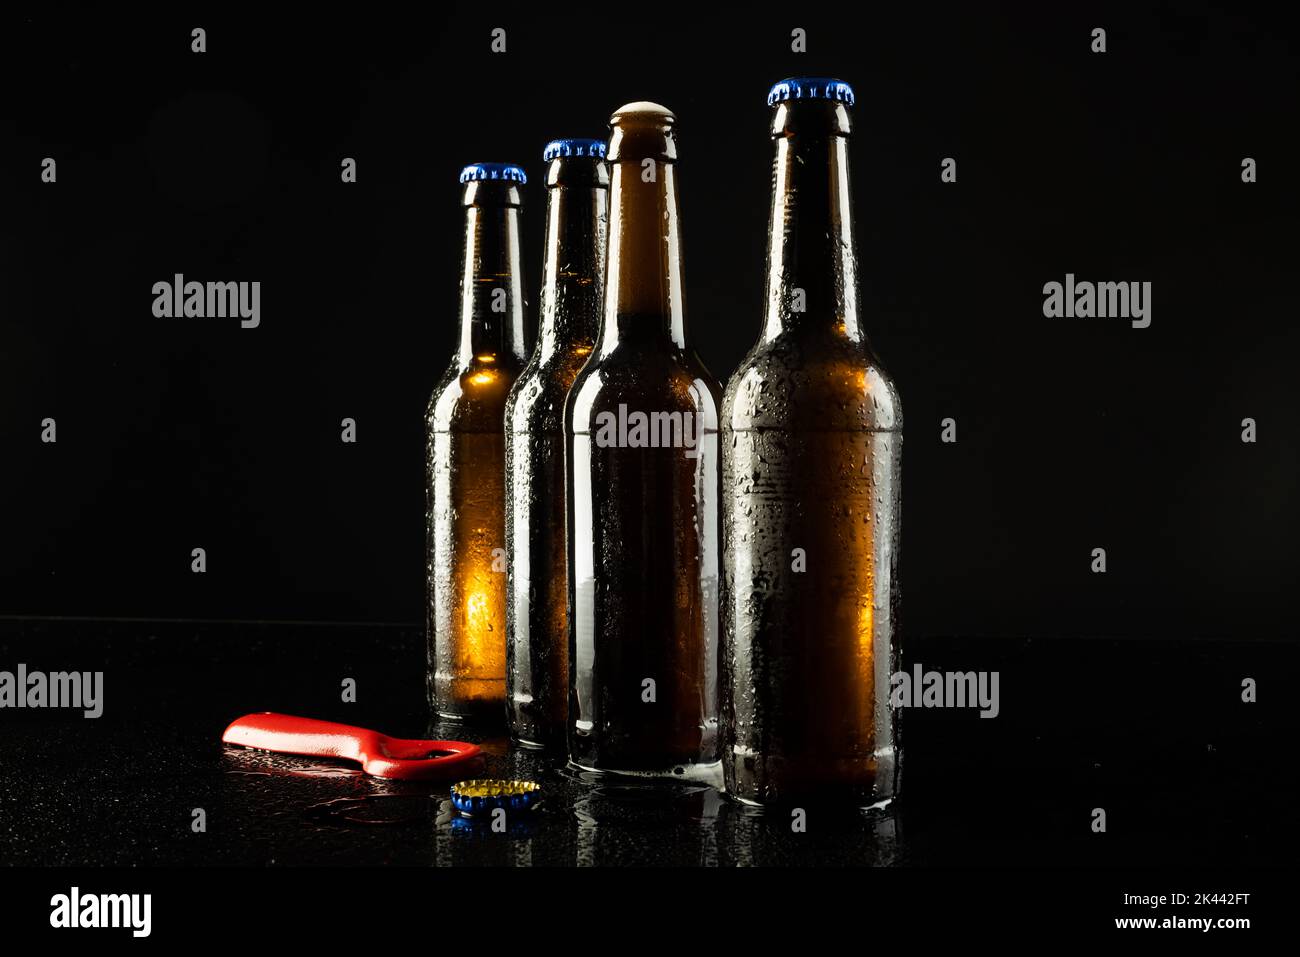 Image of red bottle opener and four beer bottles one open, with copy space on black Stock Photo